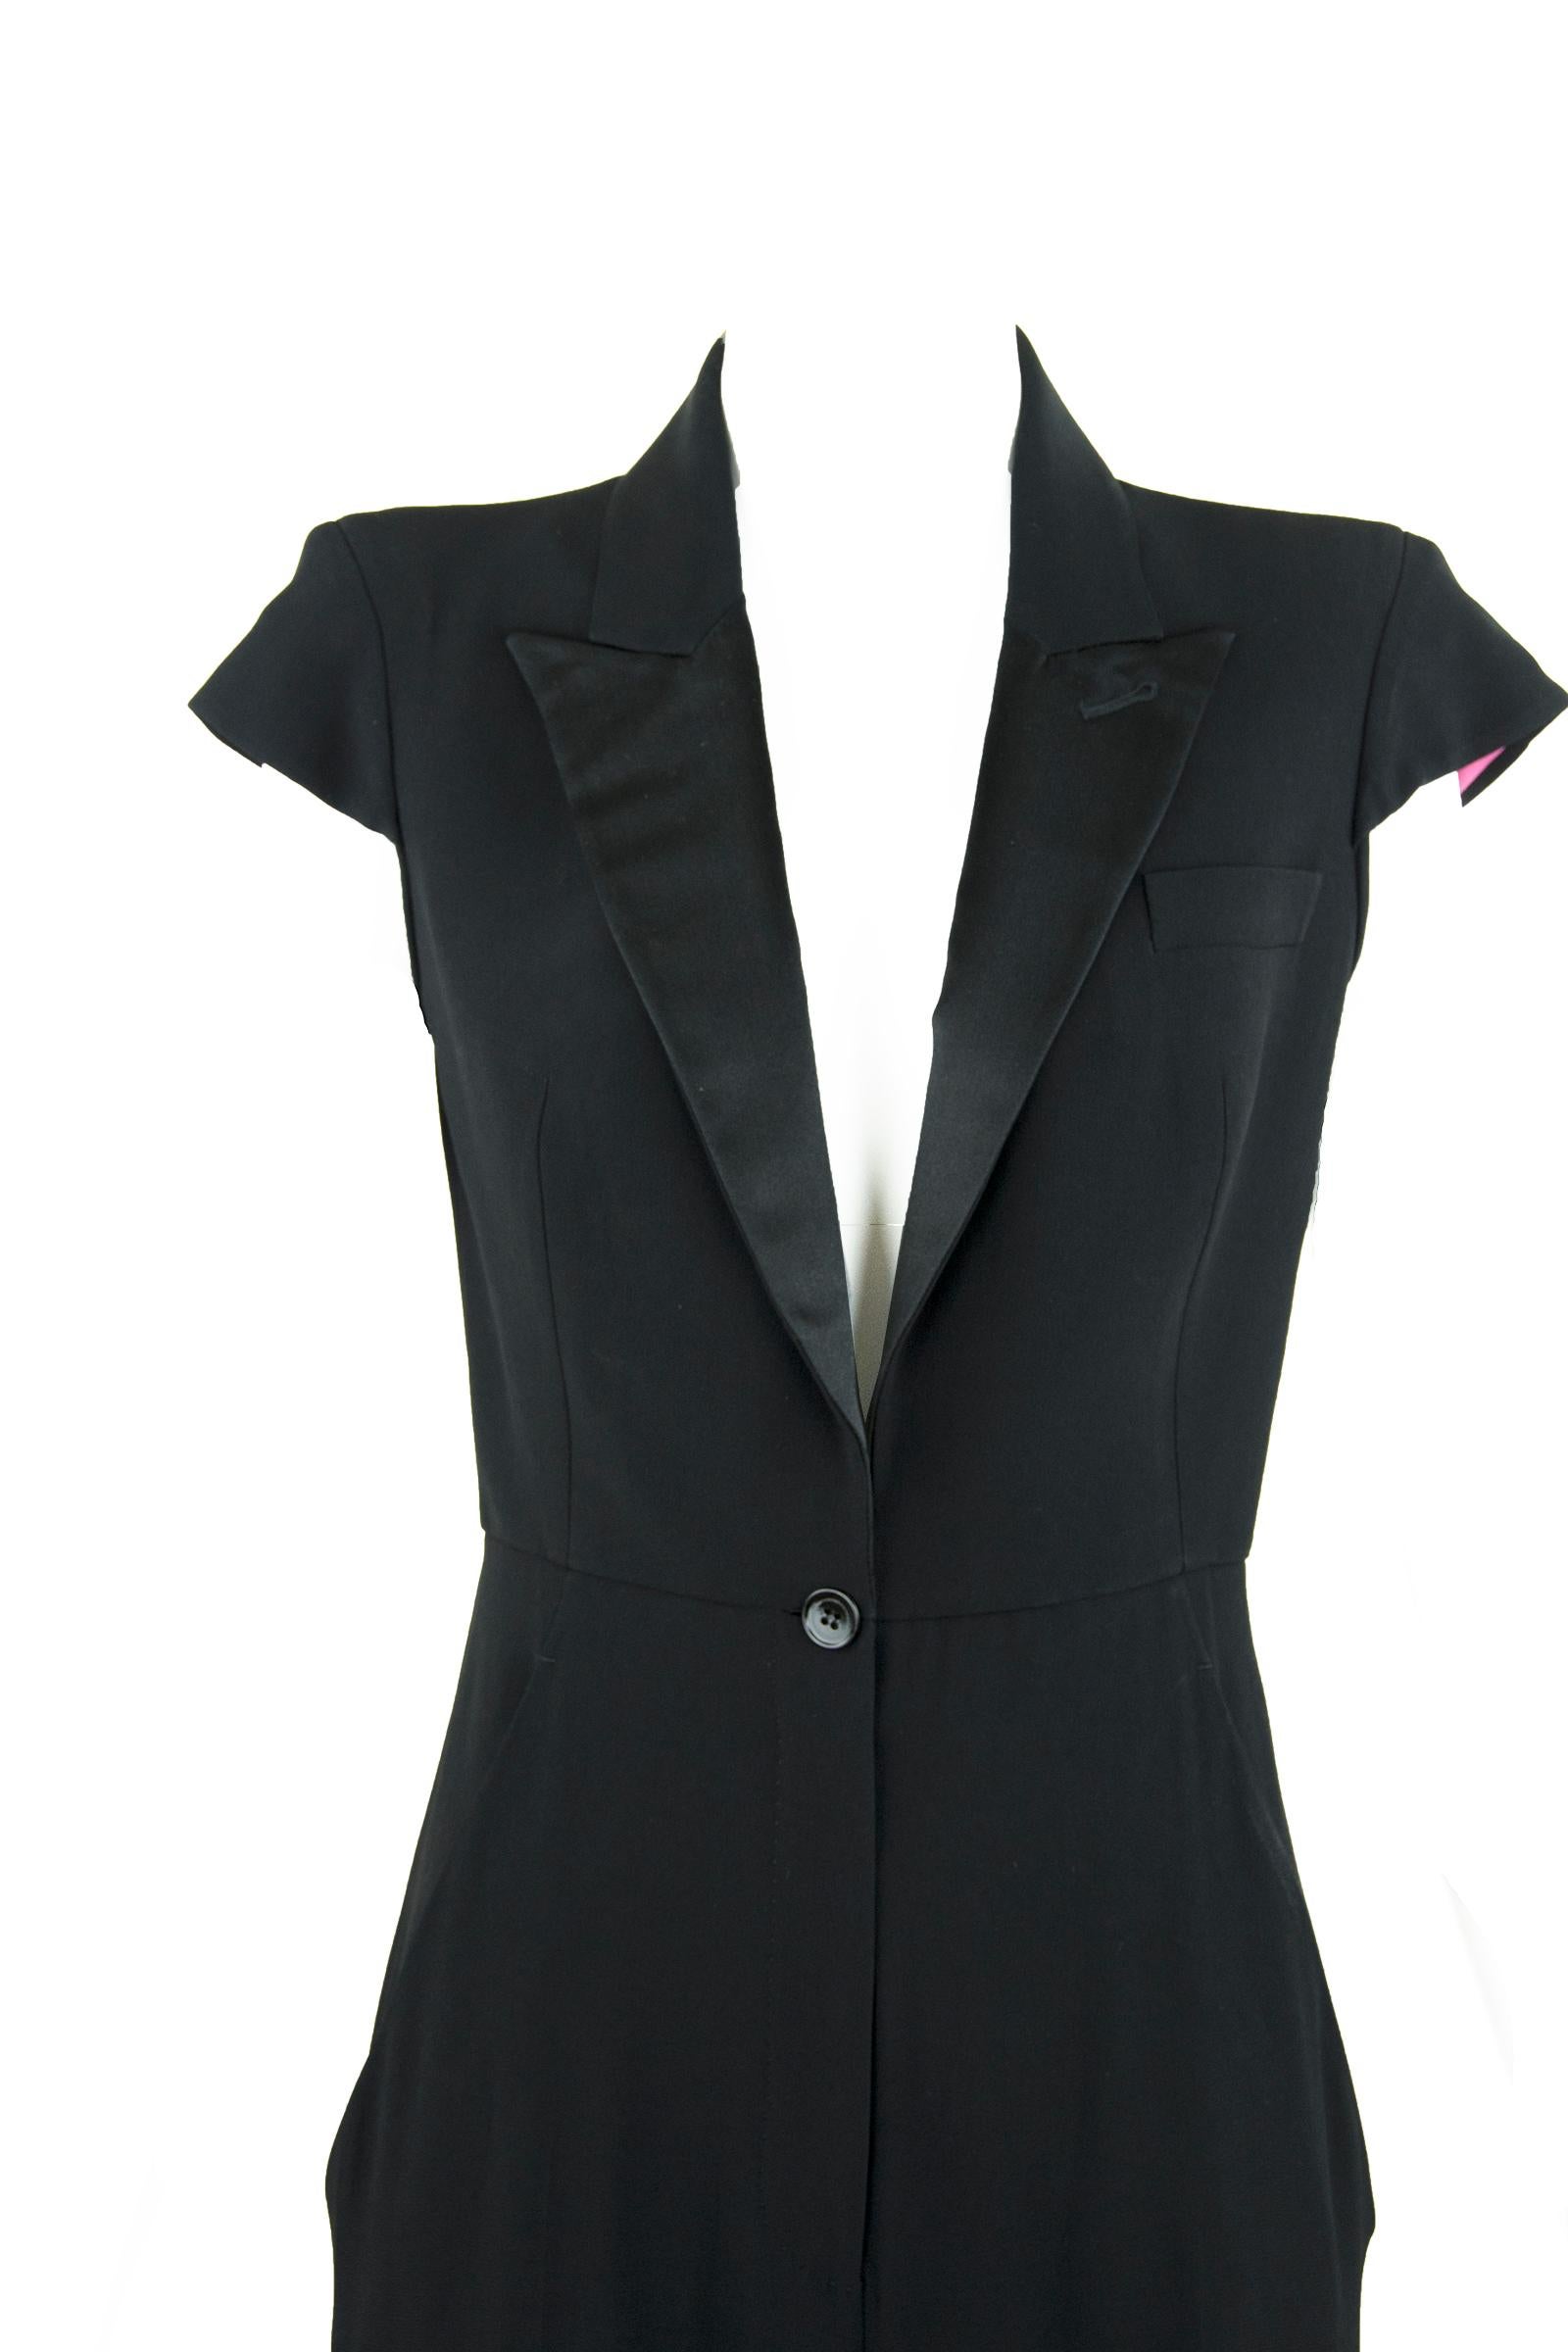 Women's Alexander McQueen Black Jumpsuit with Satin Lapel Spring 2008 Collection For Sale